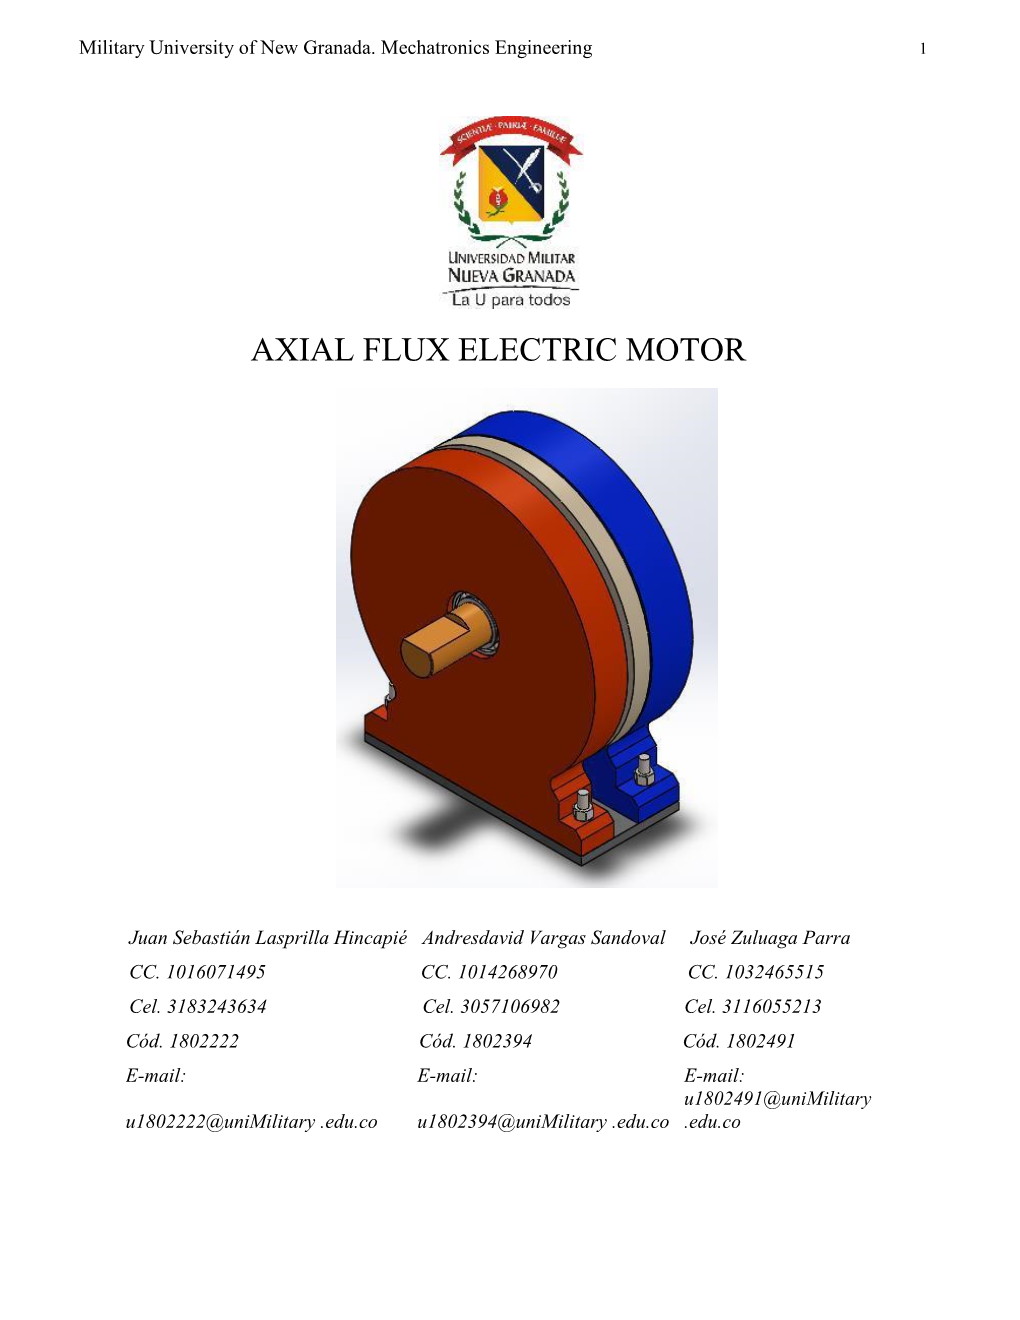 Axial Flux Electric Motor